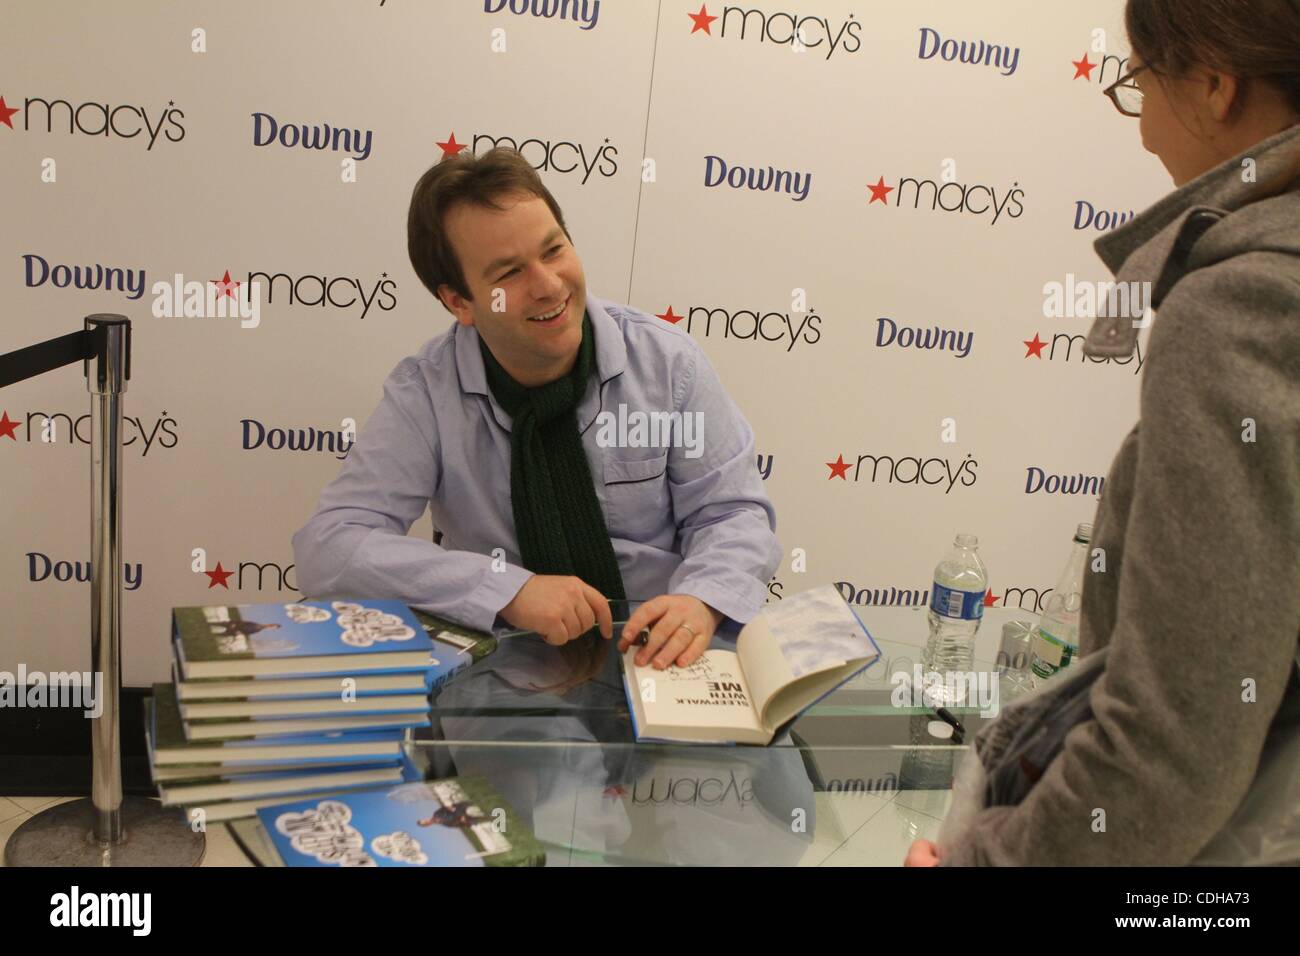 Feb 01, 2011 - New York, New York, U.S. - Comedian MIKE BIRBIGLIA sings his book 'Sleep Walk with Me' after living a week in a Macy's window display during 'Clean Sheet Week', a promotion for Downy fabric softener and Macy's at their Herald Square store in Manhattan. (Credit Image: © Mariela Lombard Stock Photo